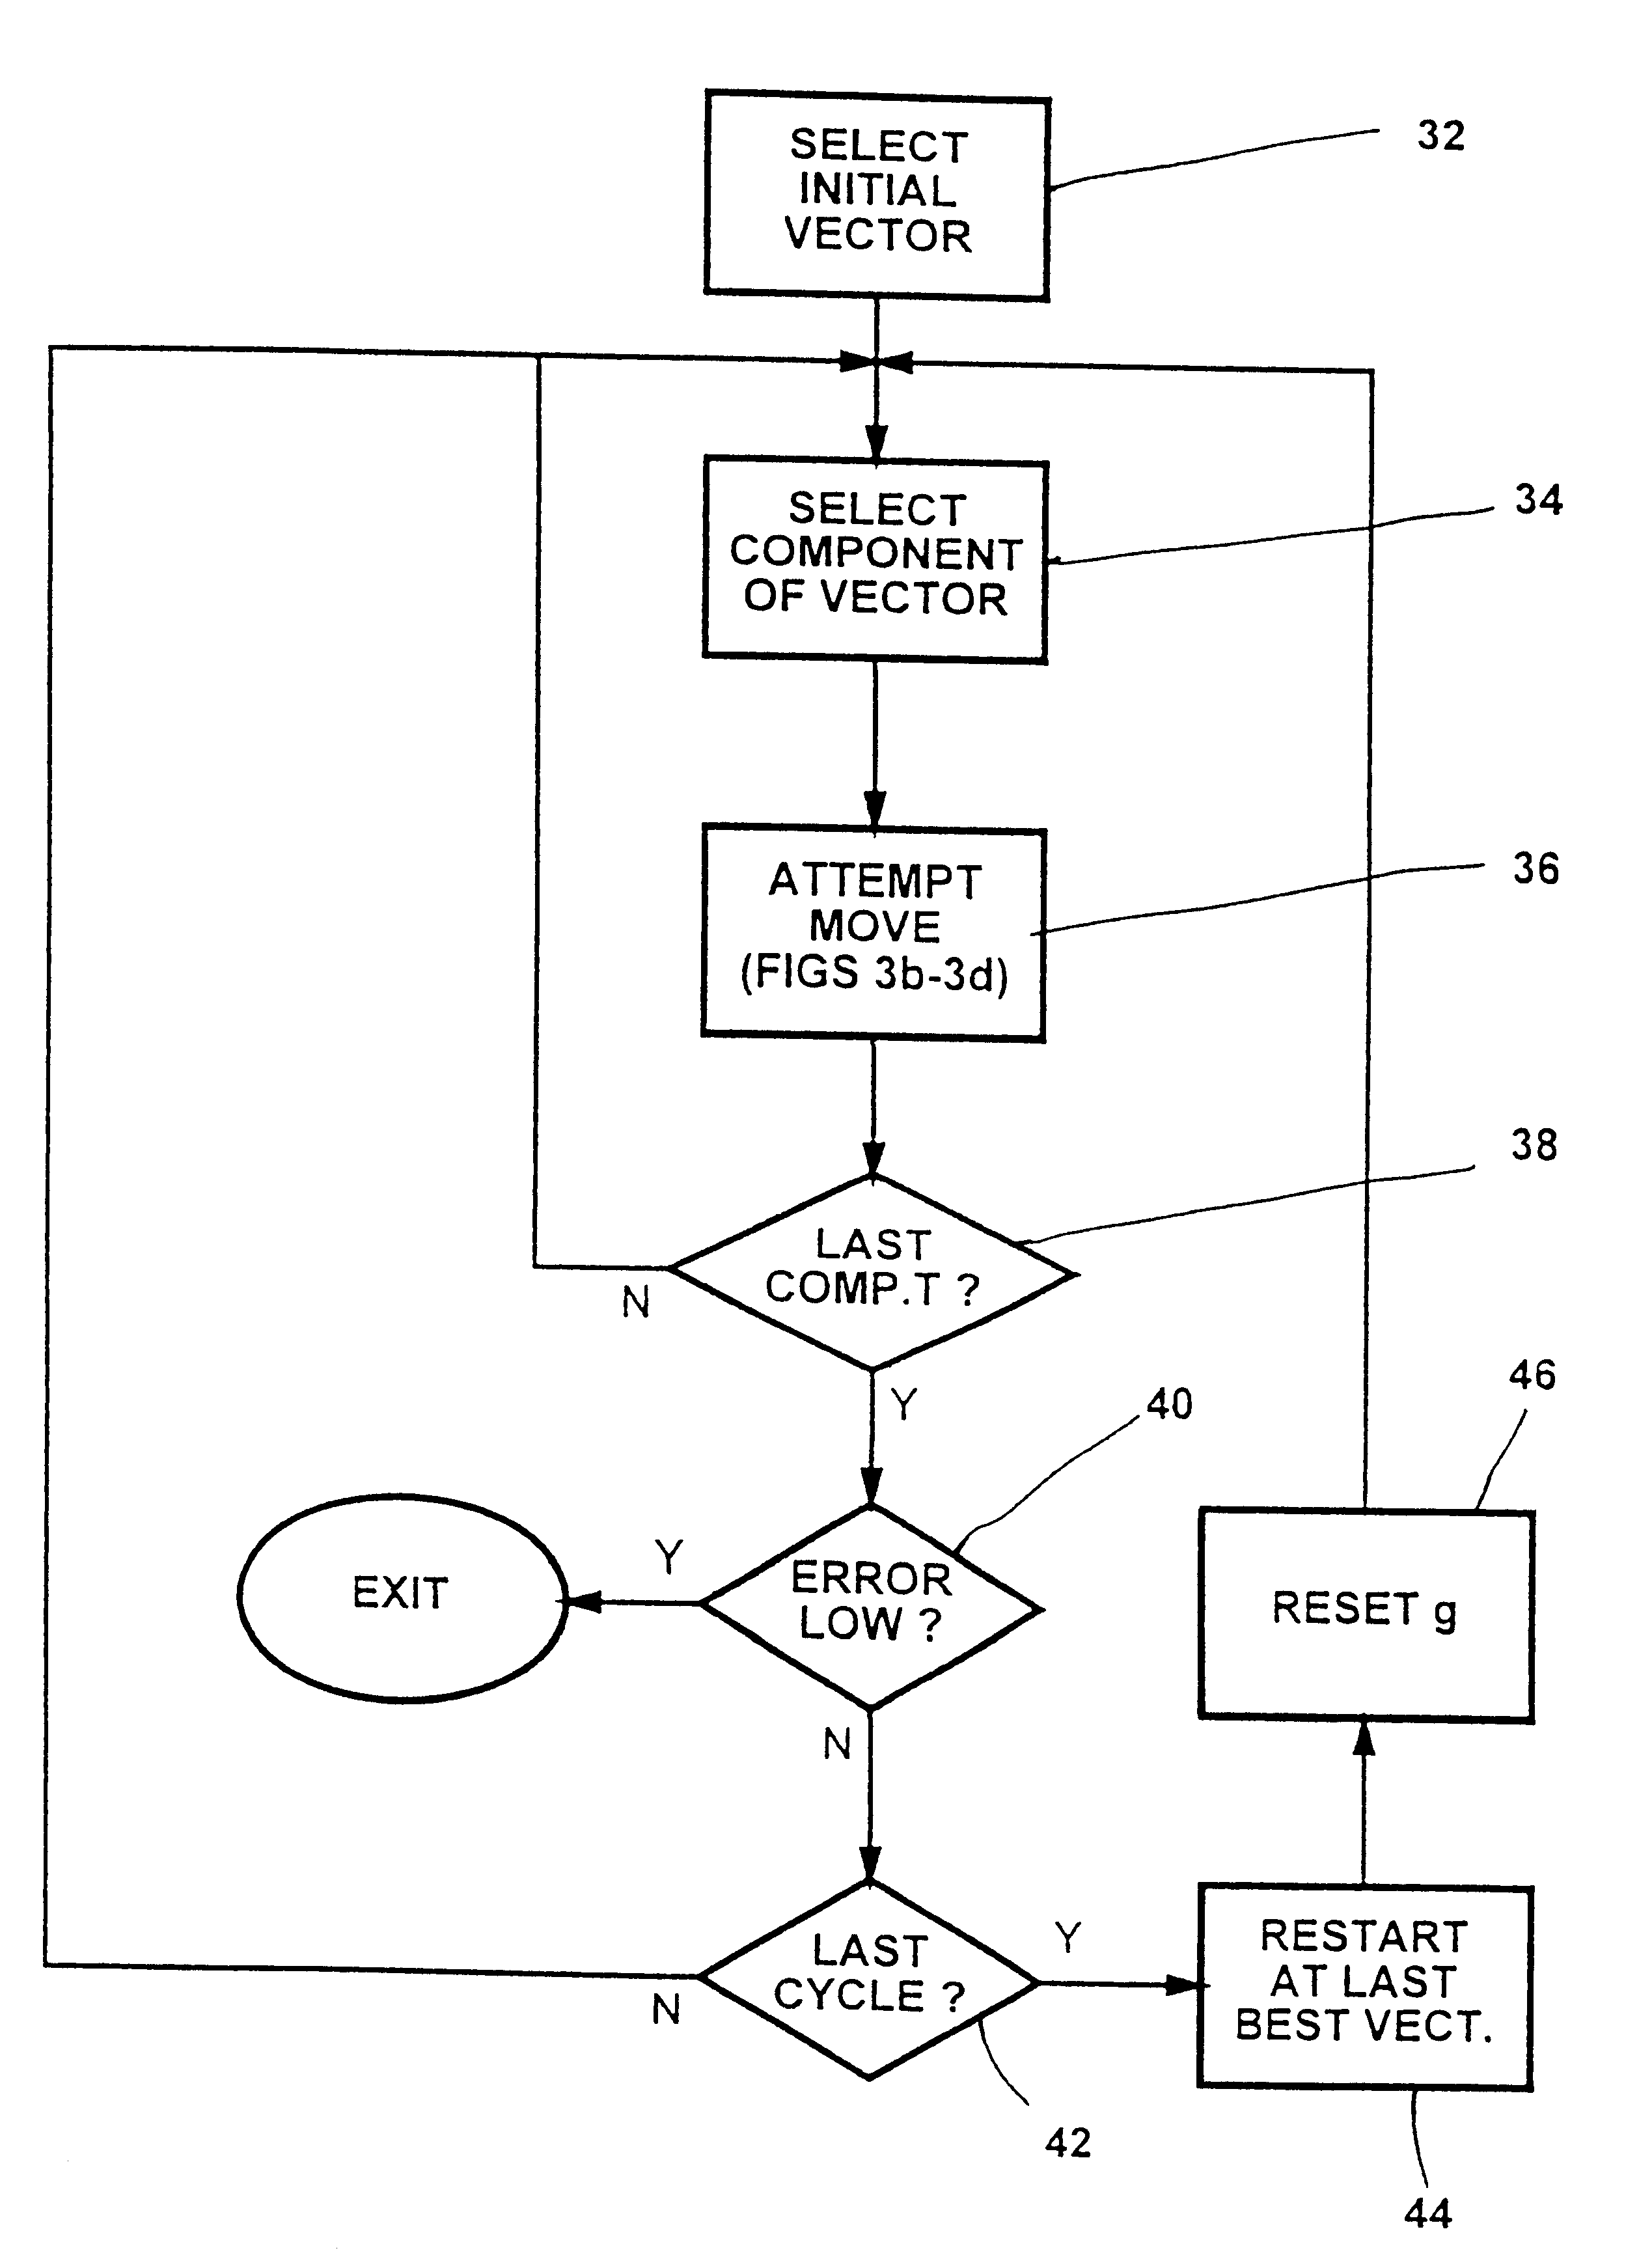 Method and apparatus for iteratively optimizing functional outputs with respect to inputs